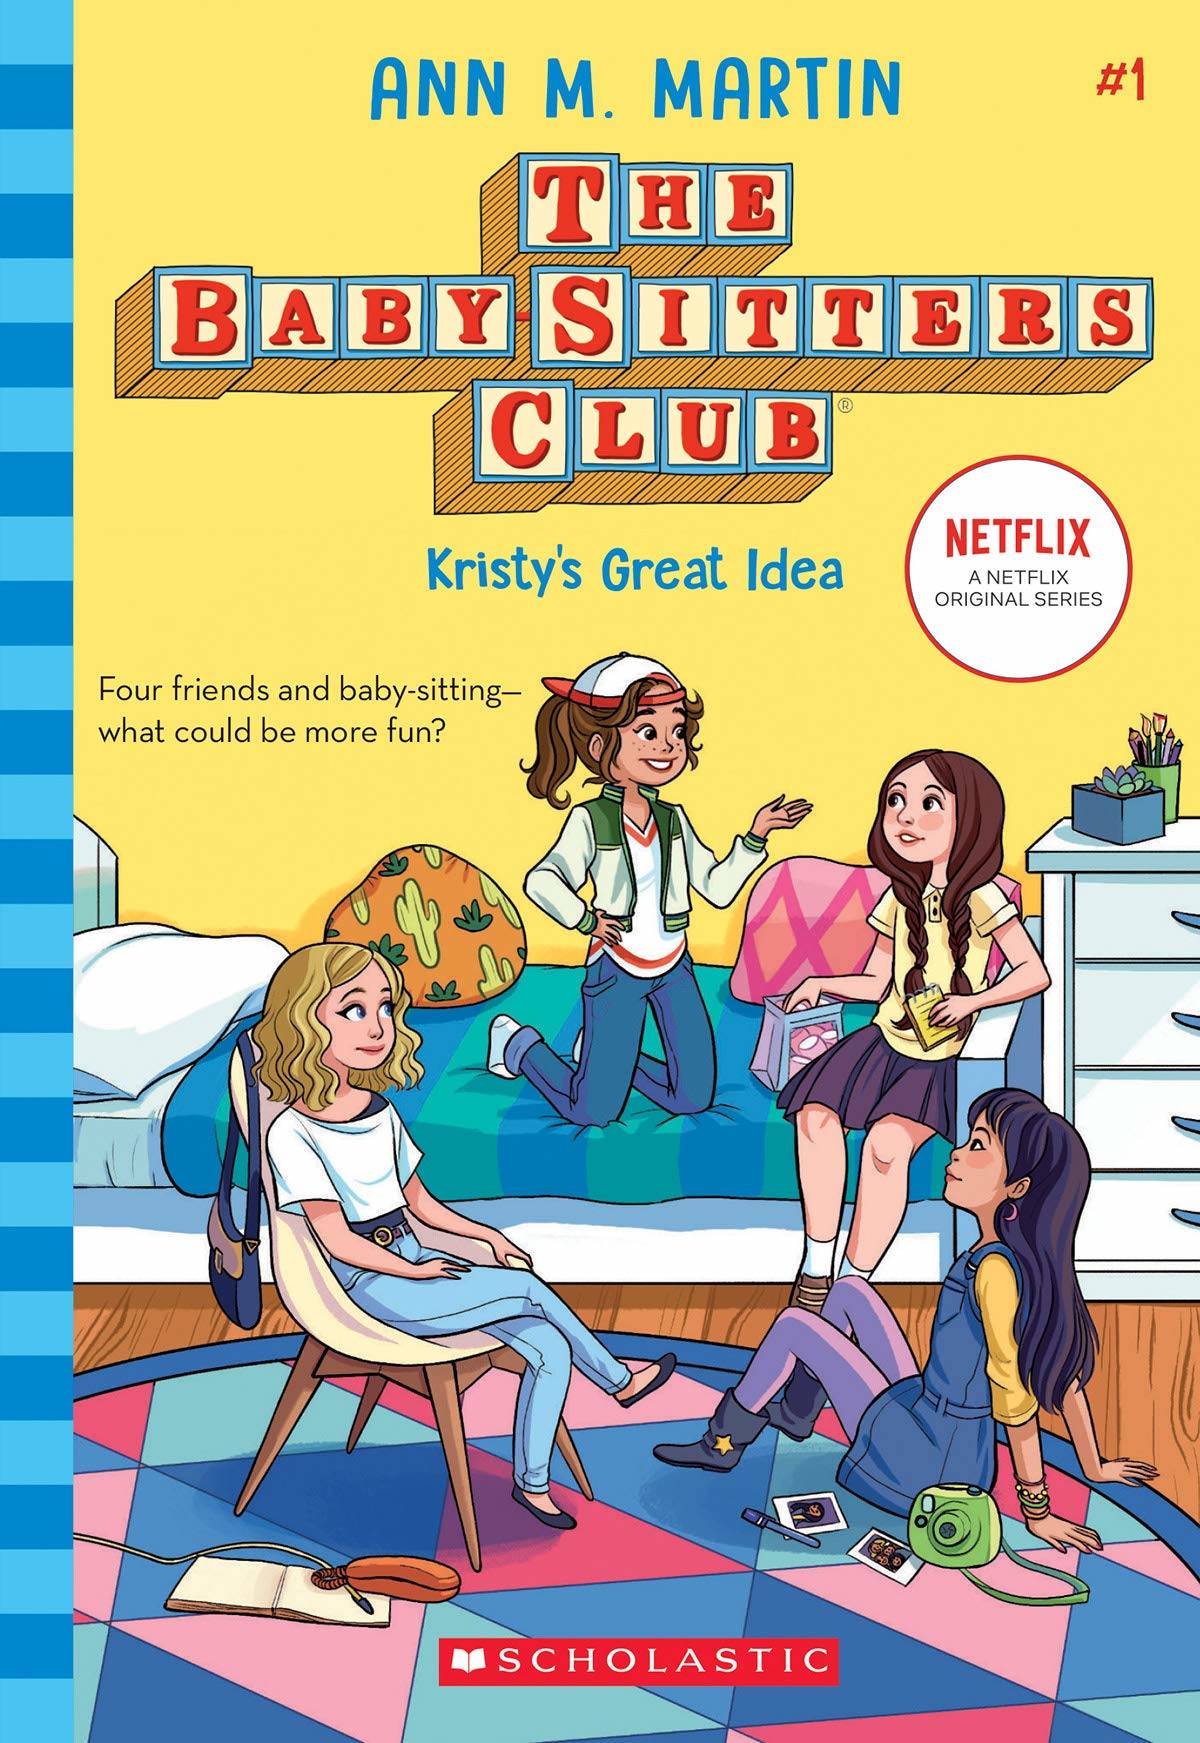 <p>Even though the covers and art style for <i>The Baby-Sitters Club</i> changed over the years, the clever plotlines directed toward young female readers still hold relevance today. </p> <p>Tackling topics like friendship, crushes, bullying, and even a bit of mystery, of course, <i>The Baby-Sitters Club</i> is a great introduction to chapter book reading for kids. </p>